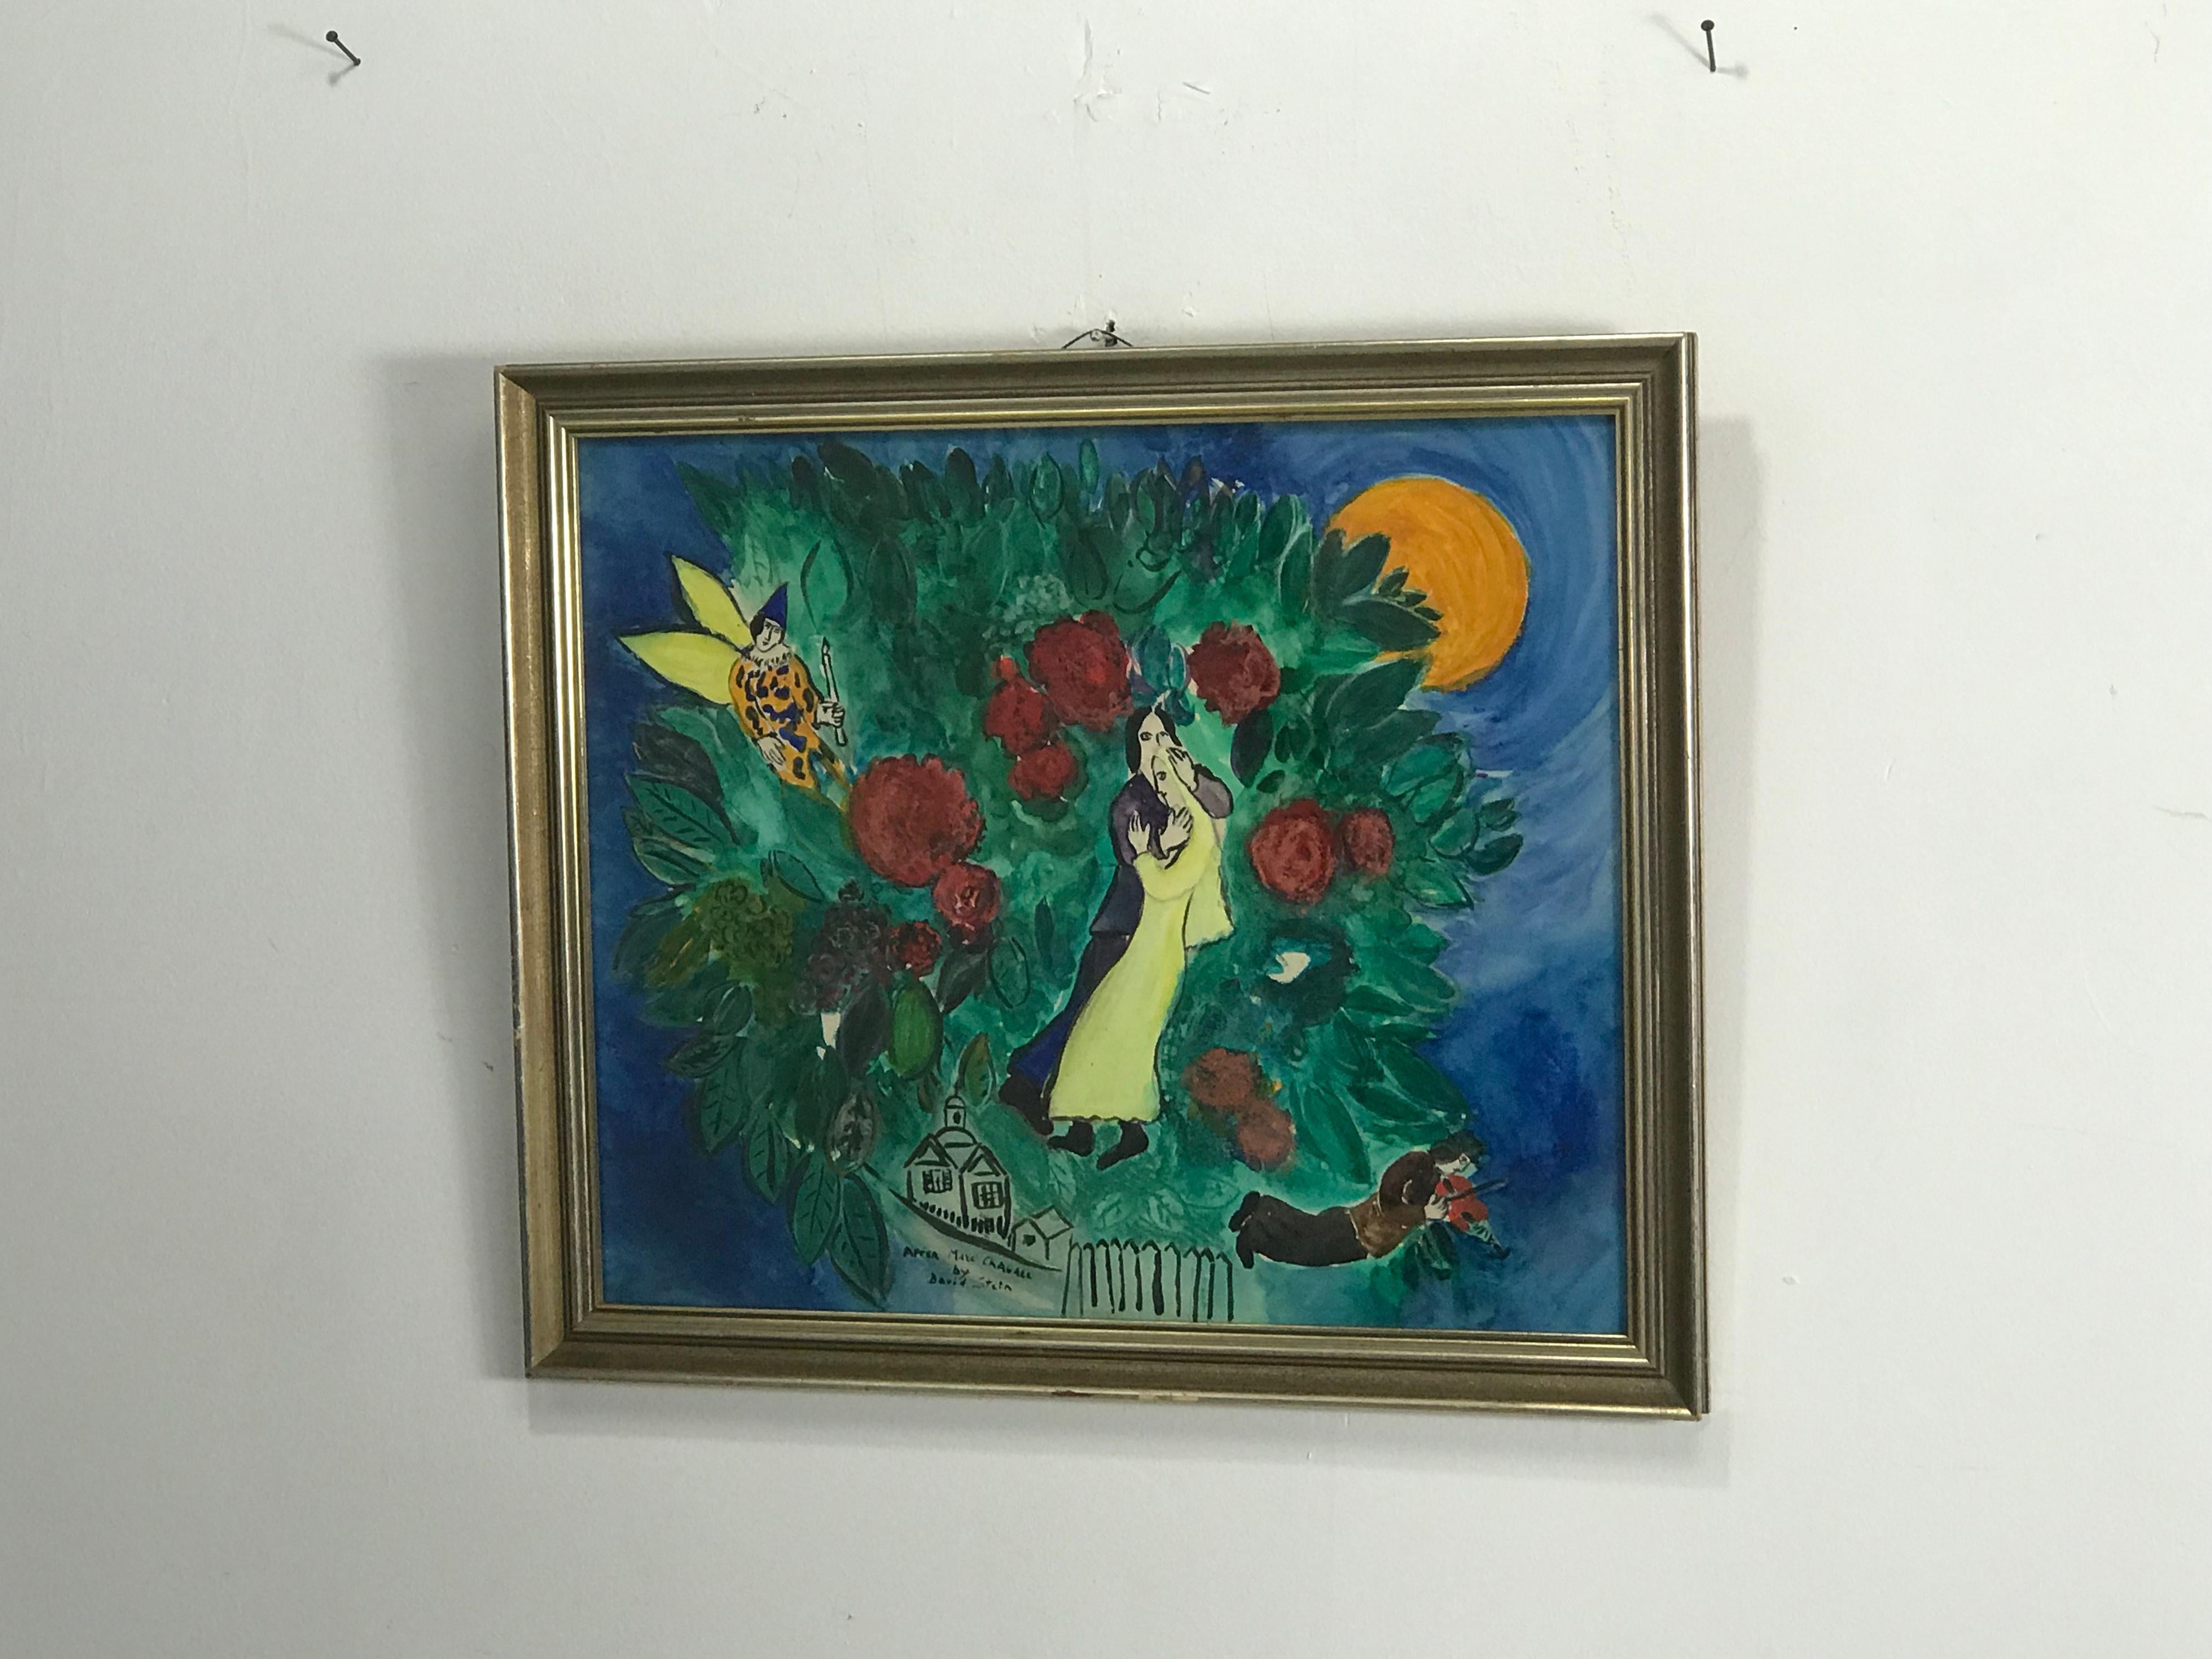 Famed forgery artist David Stein,,tribute to Marc Chagall 
Stein often copied paintings in the style of the masters. For example, he studied Marc Chagall, Matisse, Braque, Paul Klee, Miró, Jean Cocteau and Rouault, in order to copy their color